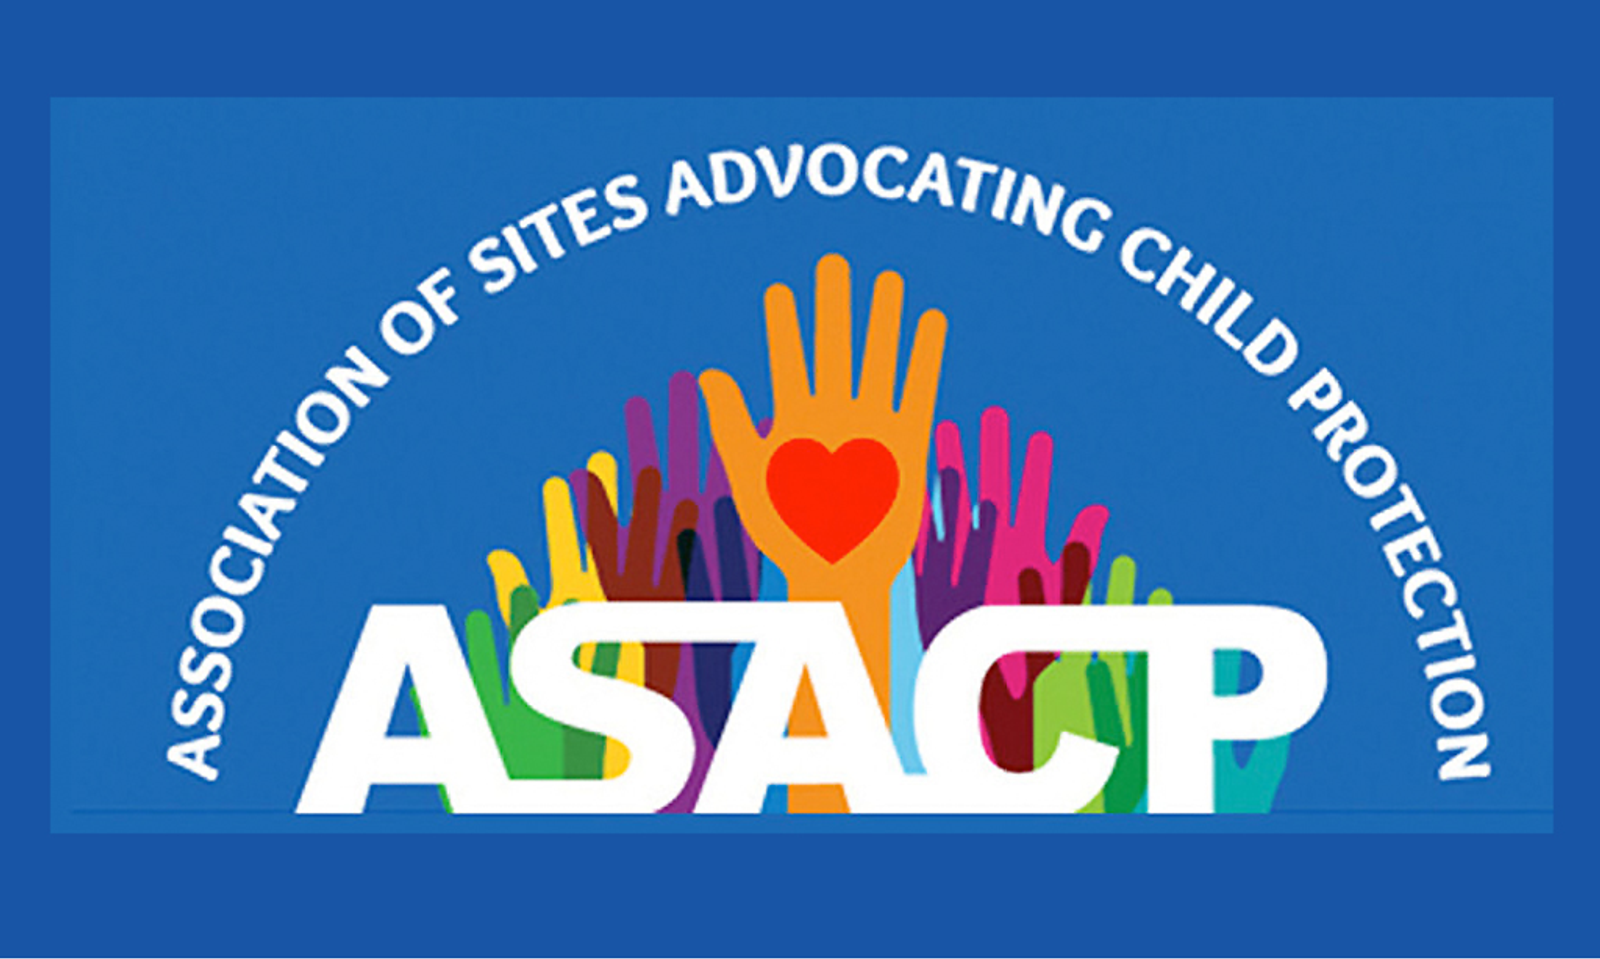 ASACP to Discuss State of Online Child Protection at Qwebec Expo